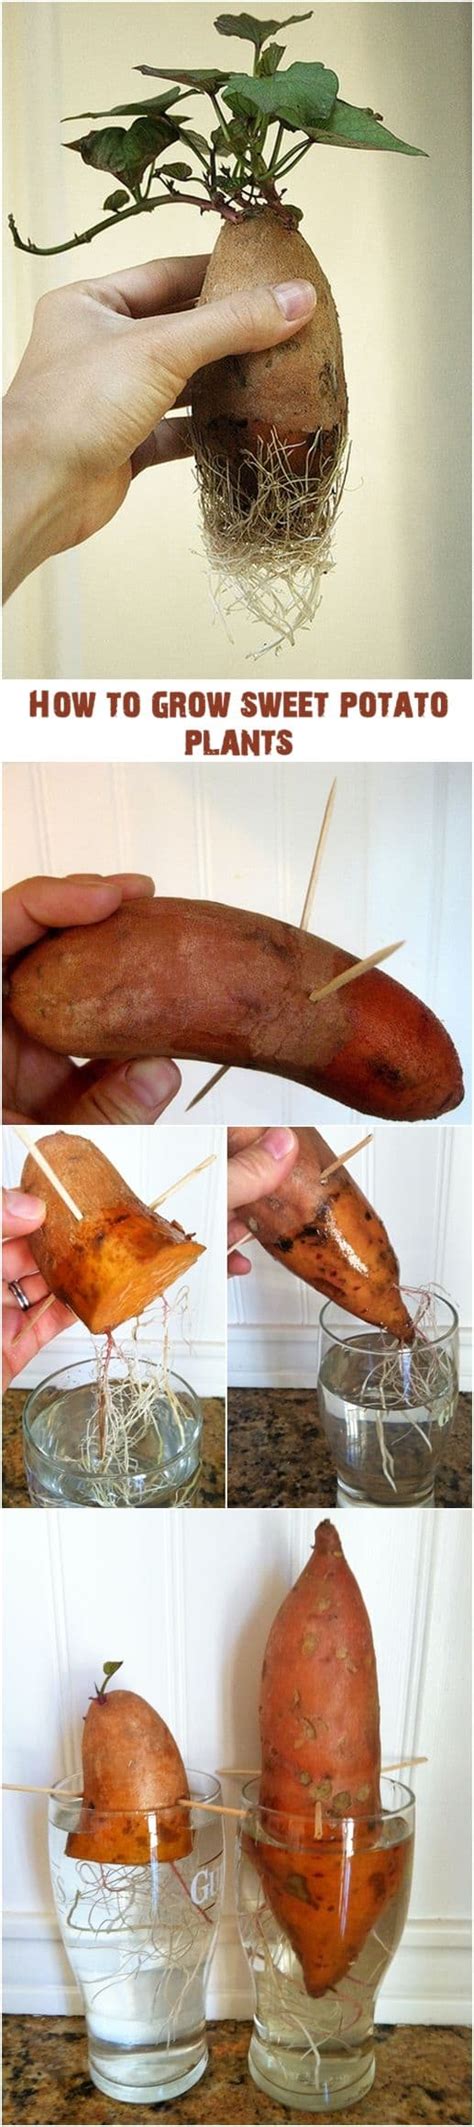 Begin sprouting slips 6 to 8 weeks before planting outdoors. How To Grow A Sweet Potato Vine From A Sweet Potato ...